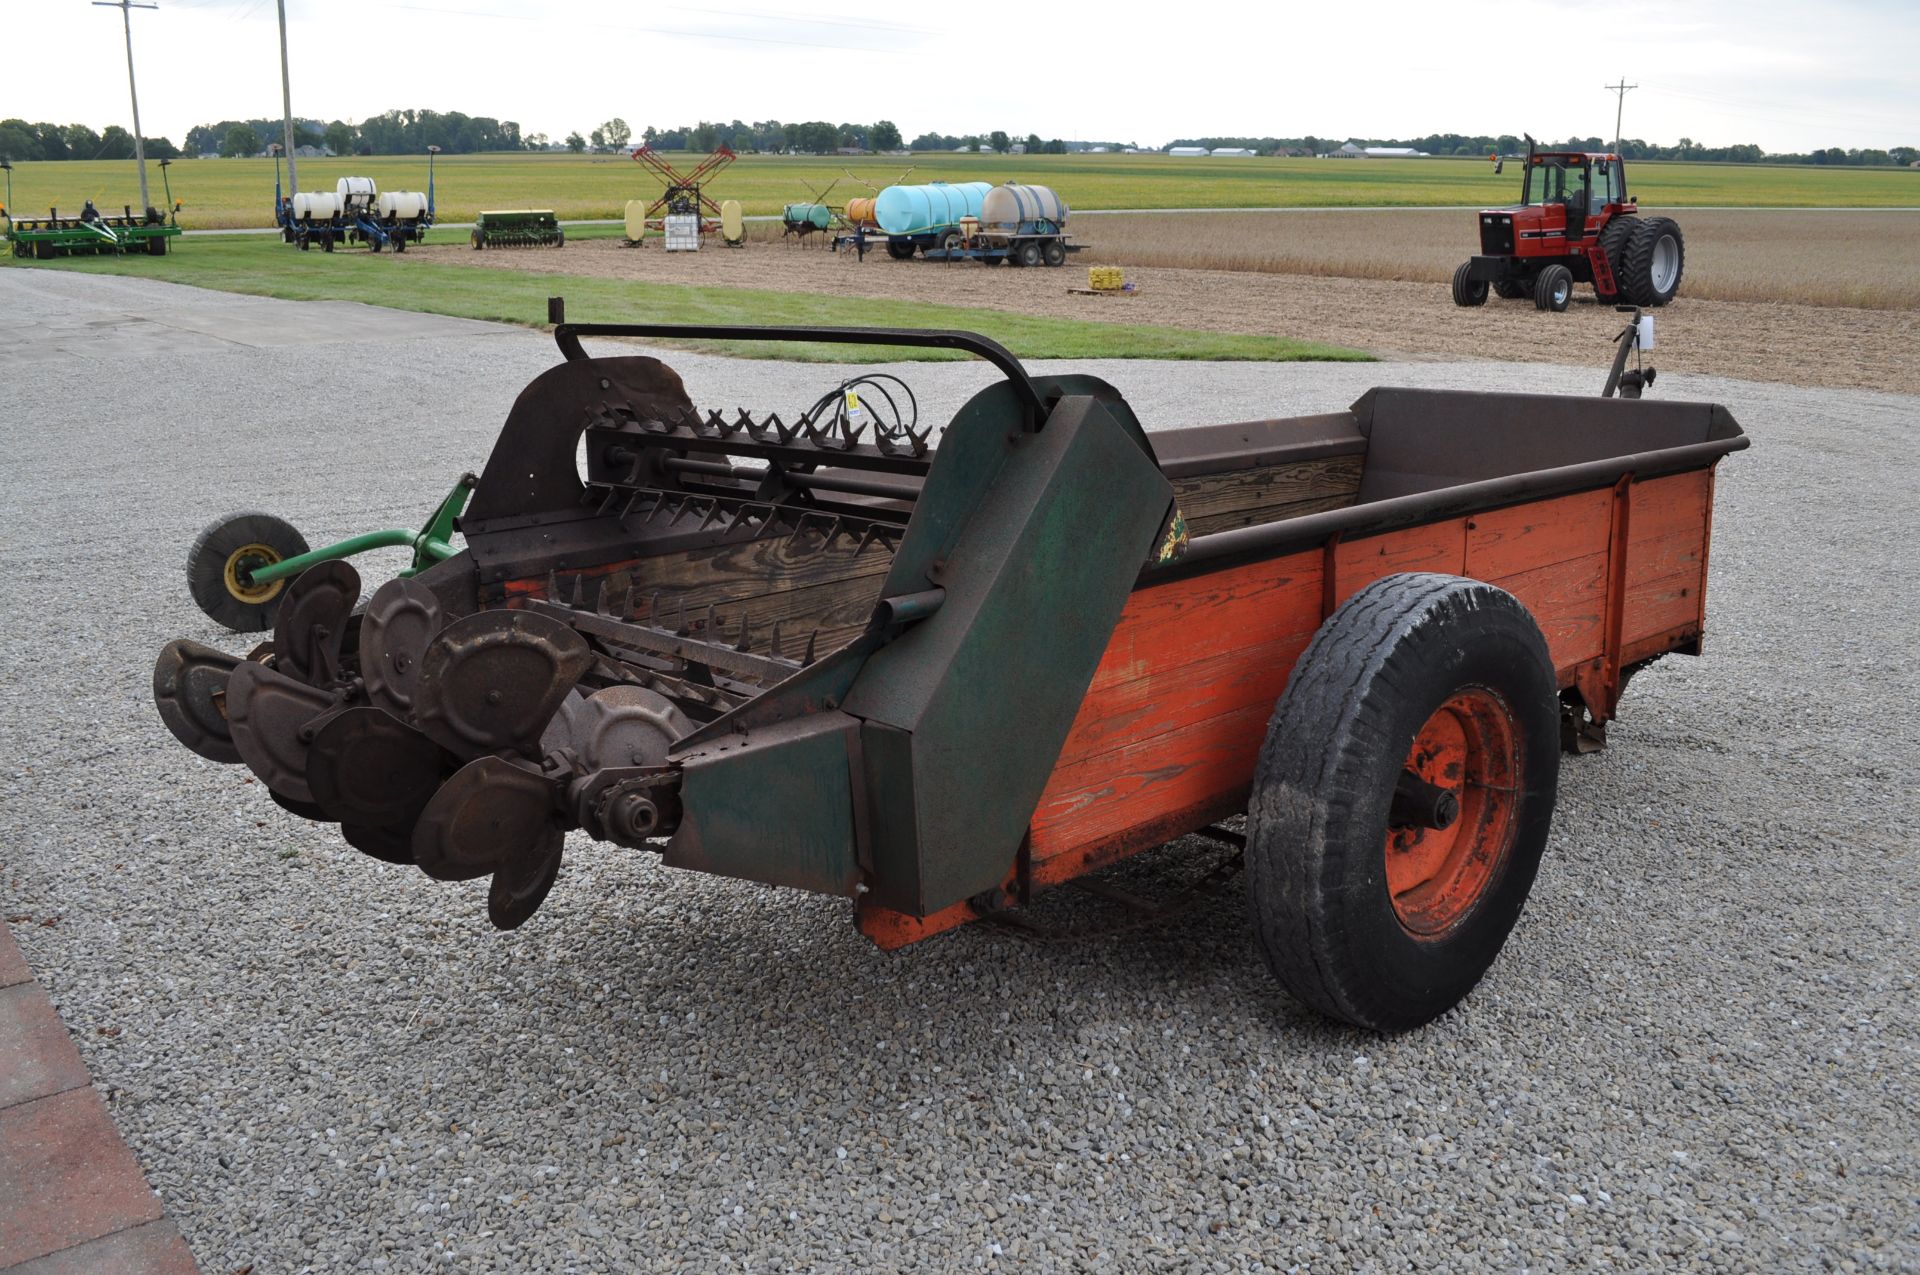 New Idea manure spreader, 540 pto, 11’ bed, triple beater - Image 3 of 12